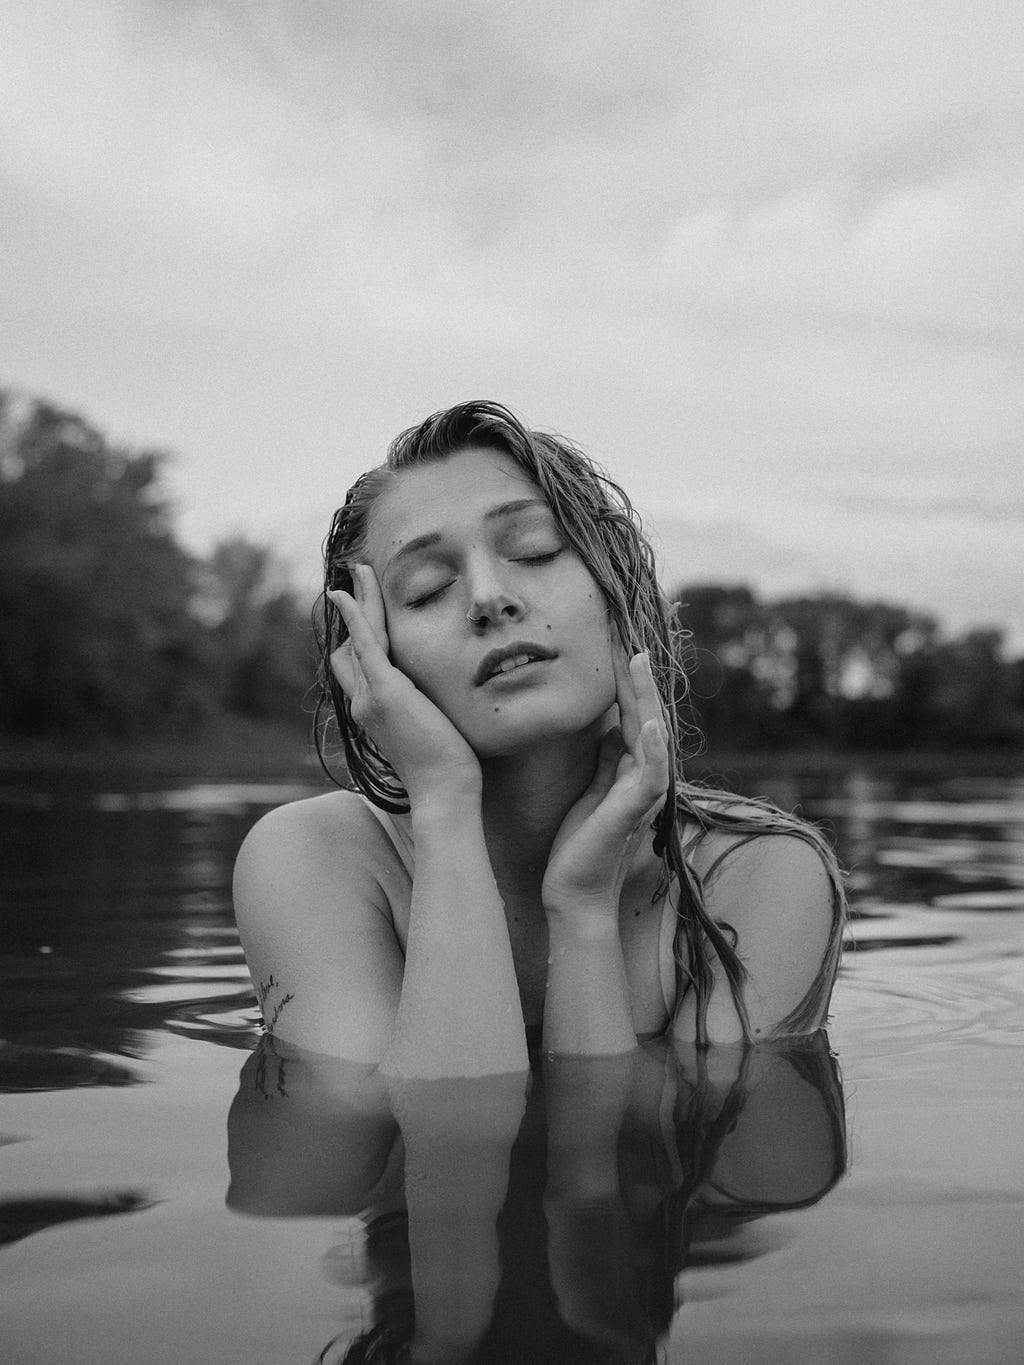 Woman standing in water up to her chest, touching her face with her eyes closed as if daydreaming.